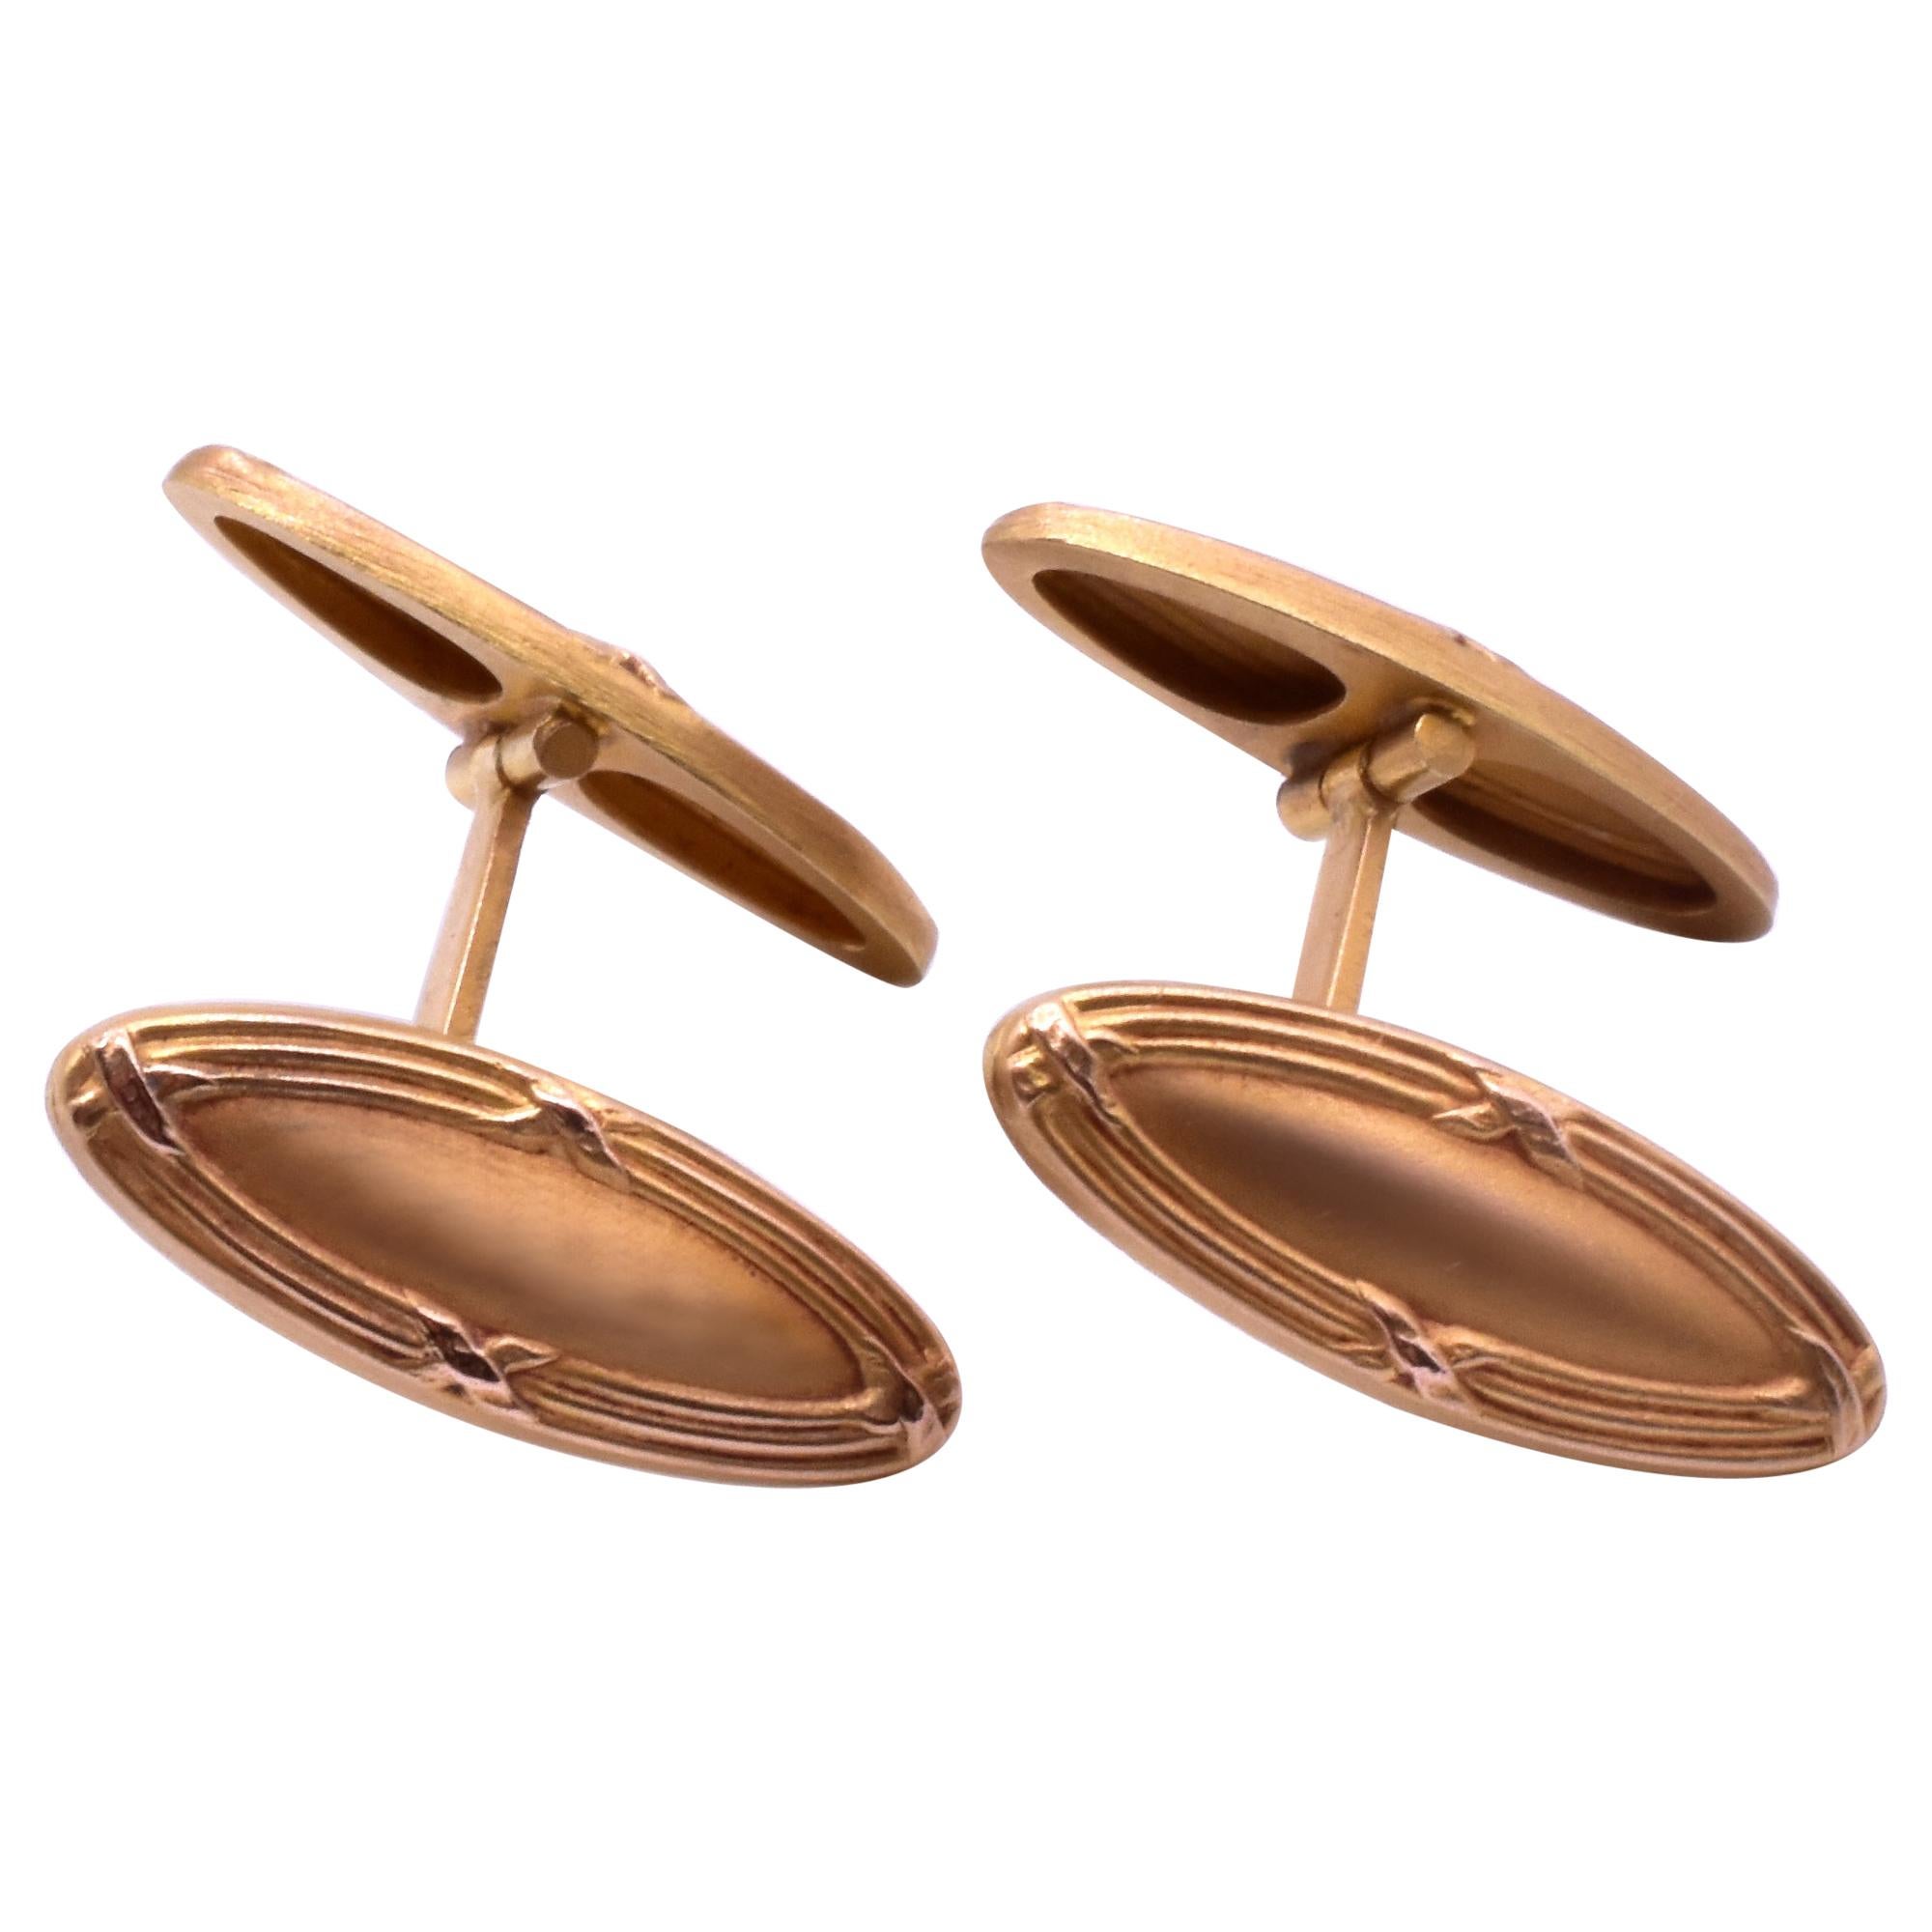 18 Karat French Embossed Cufflinks with "X" Design, circa 1940 For Sale